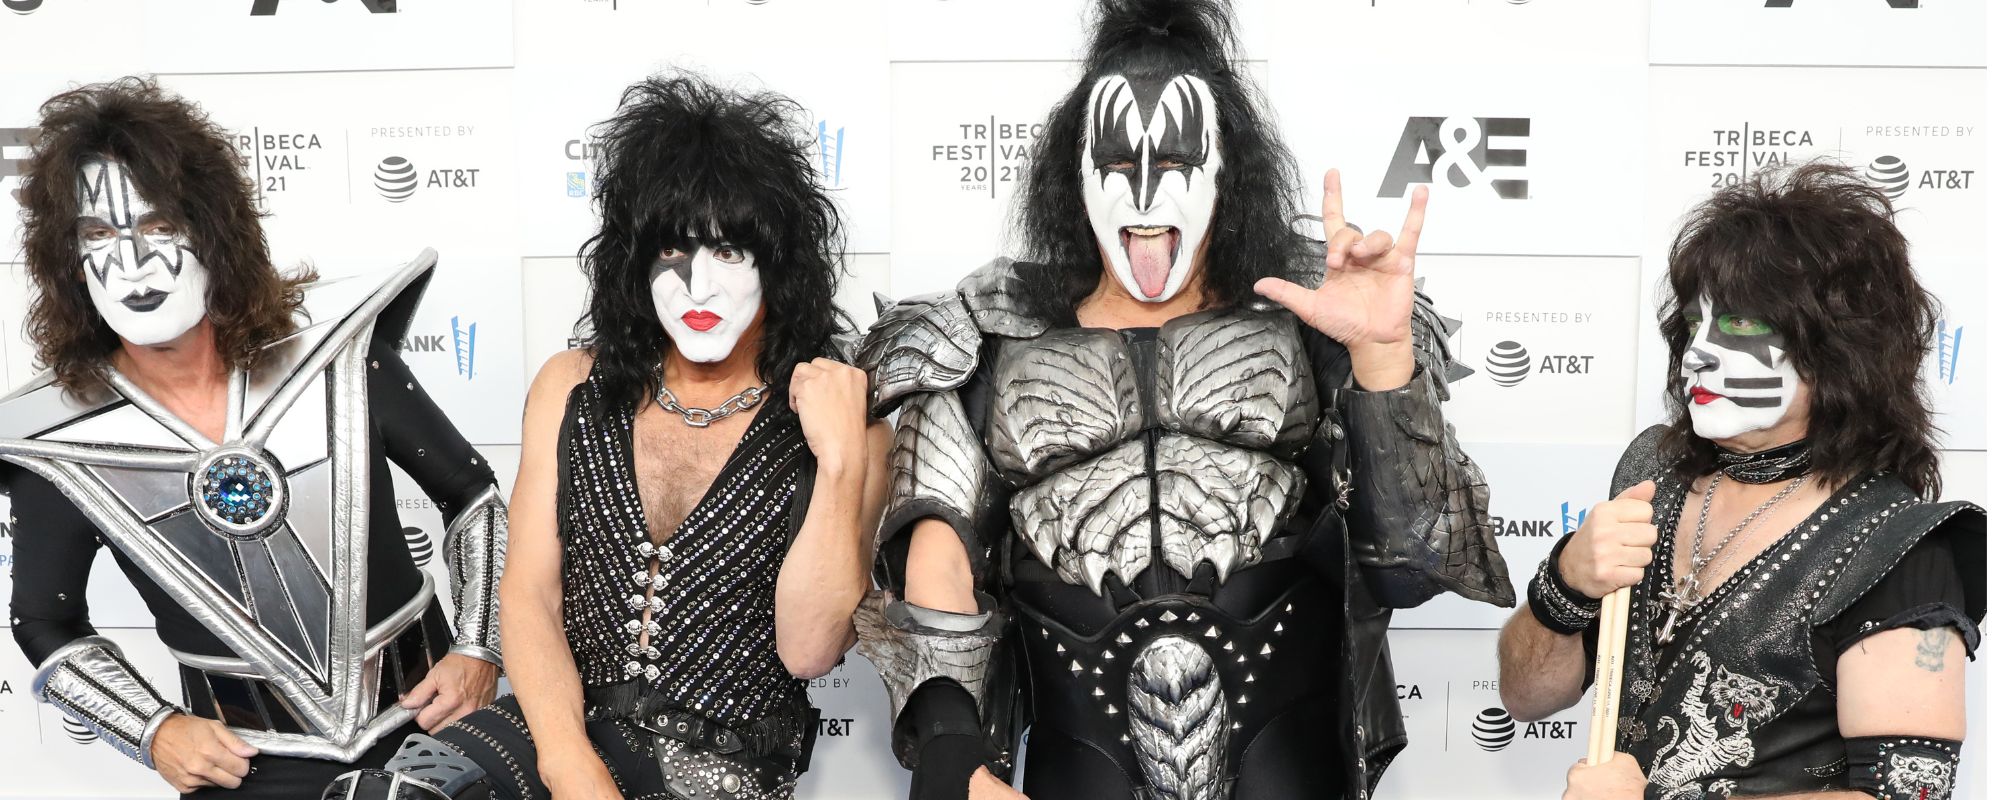 3 Eternal Classic Rock Songs from KISS